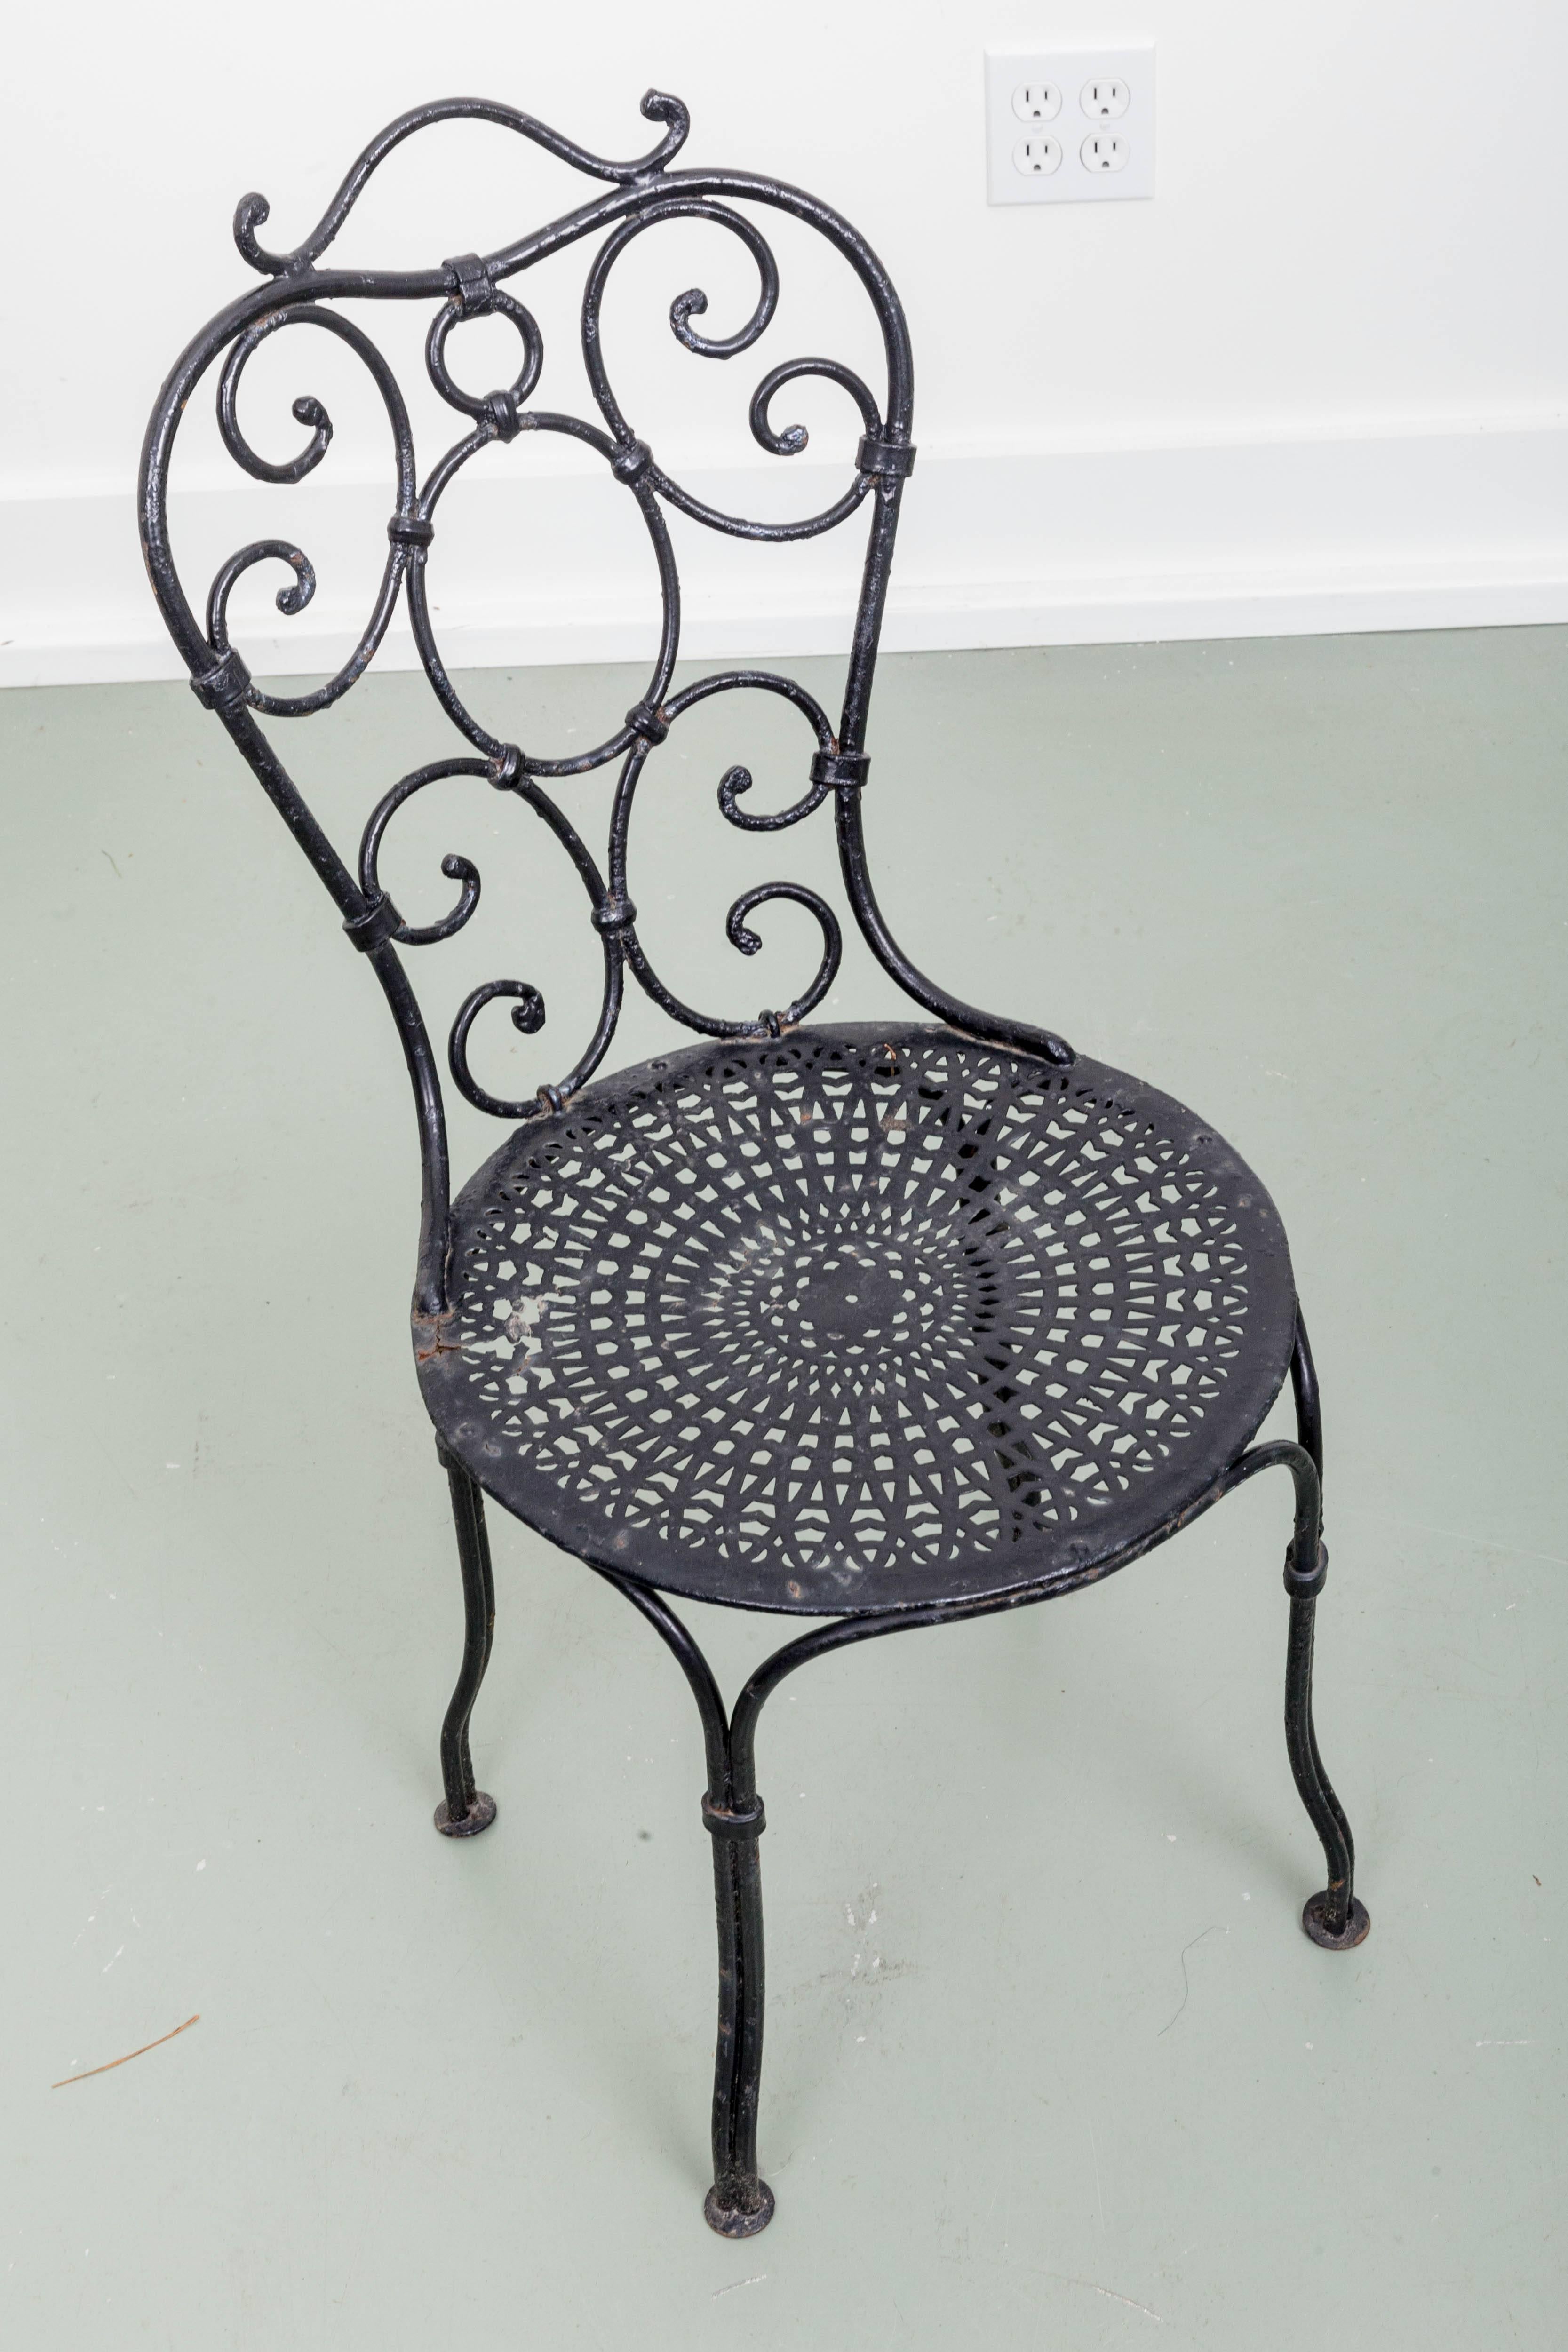 Pair of early French wrought iron garden chairs scroll backs with perfurated seats, from Paris.